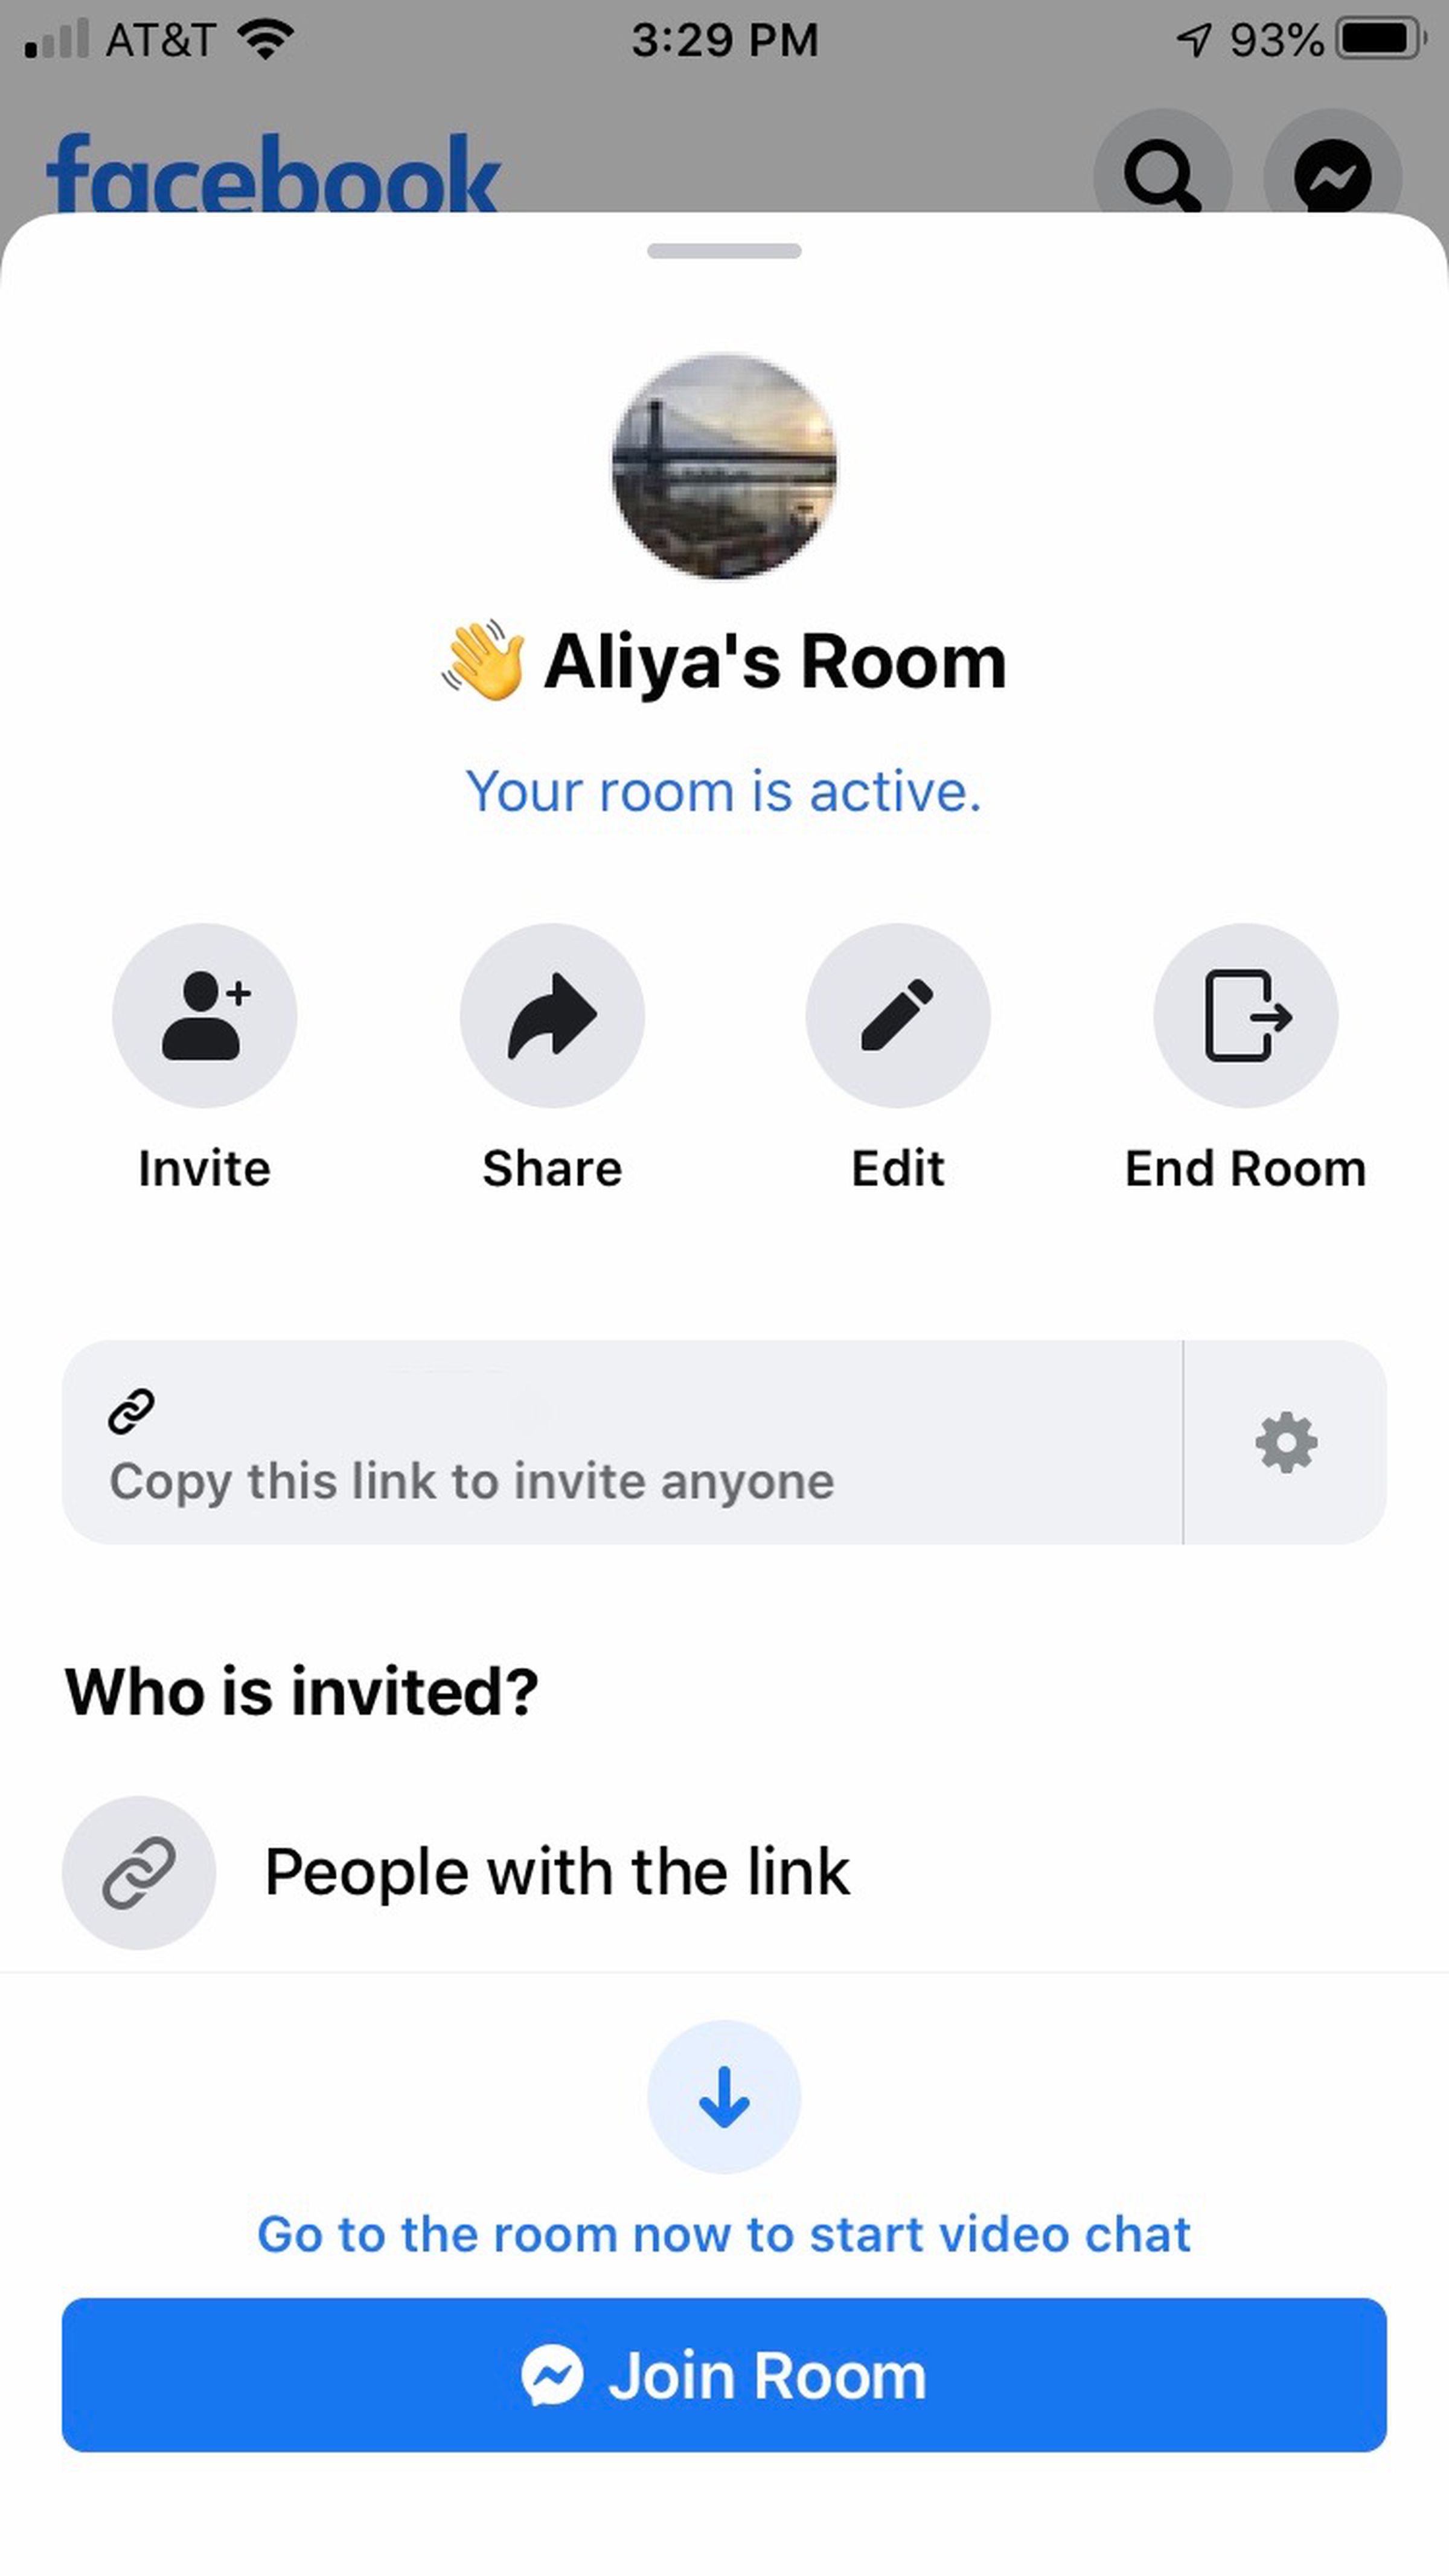 In the middle of the screen, you’ll see buttons labeled, “Invite,” “Share,” “Edit,” and “End Room.” Below that is the invite link and at the bottom of the screen is the “Join Room” button.